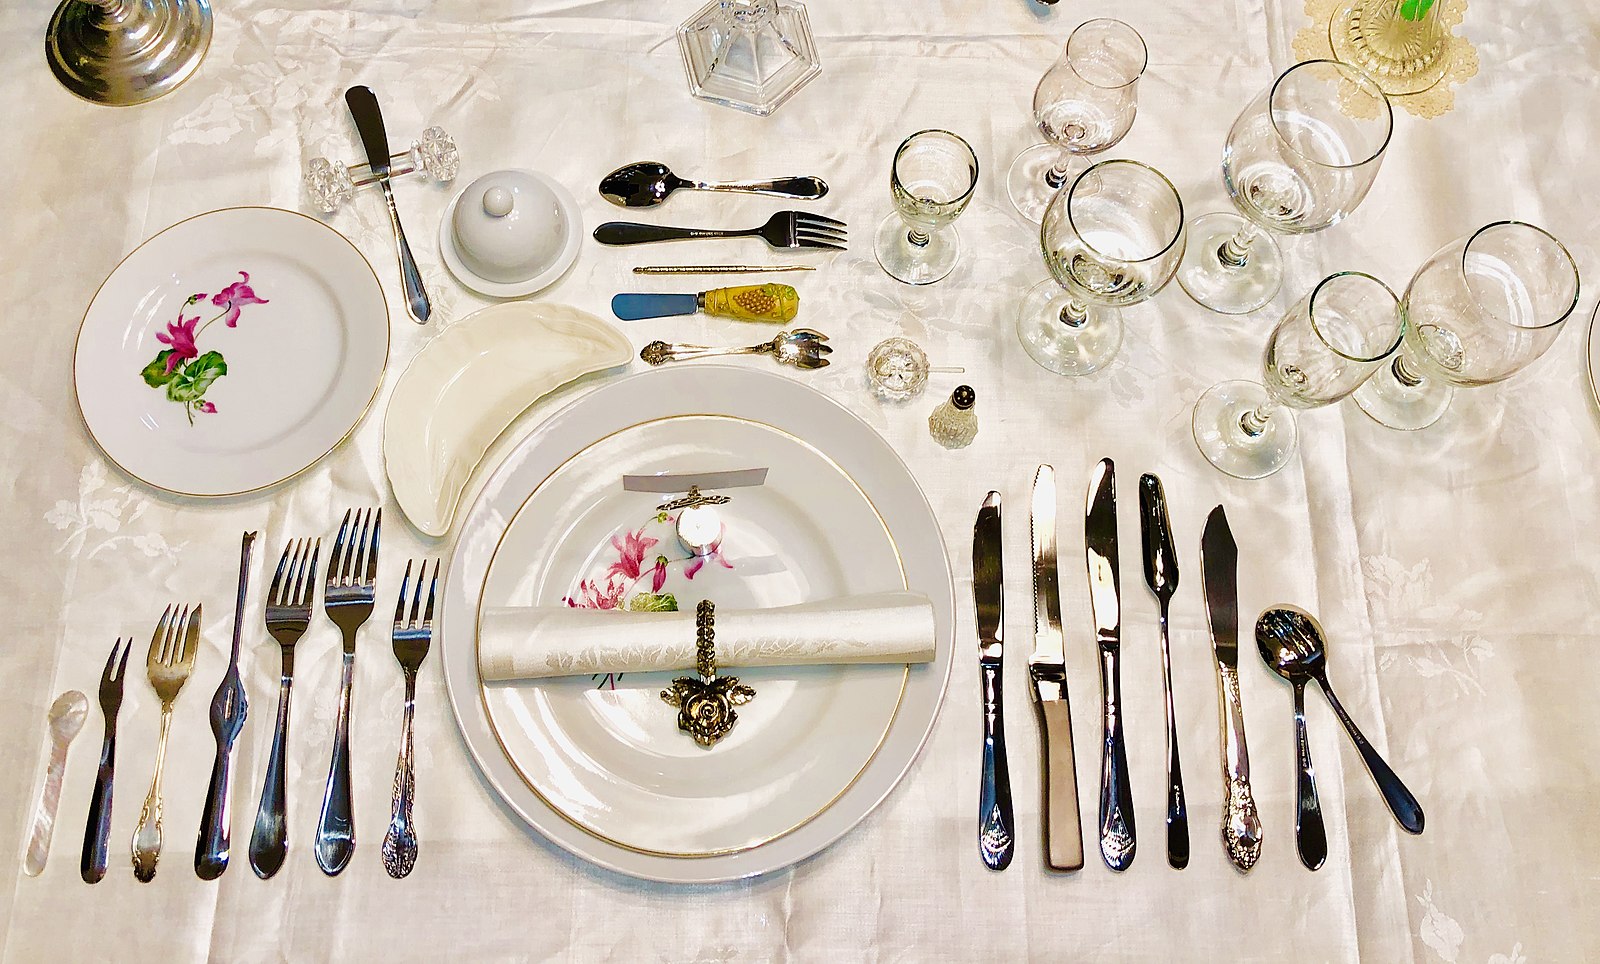 A place setting at a dining table, with many similar-looking utensils.